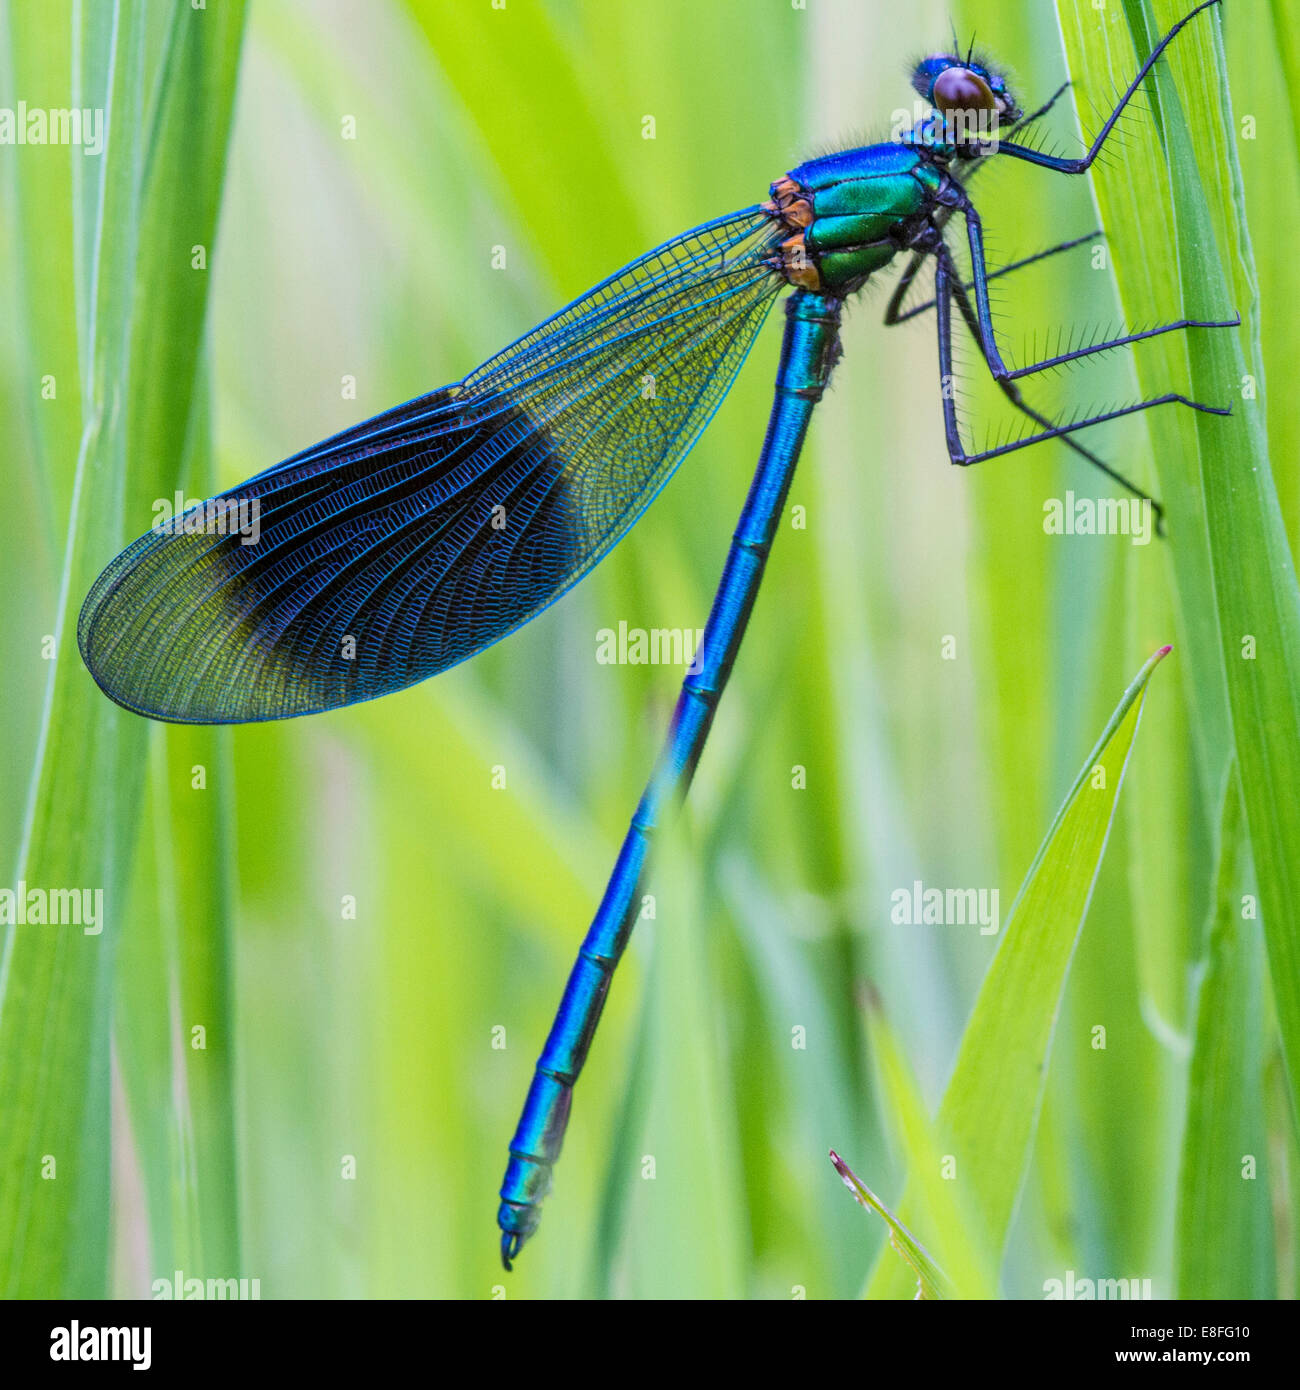 Close-up of dragonfly sur brin d'herbe Banque D'Images